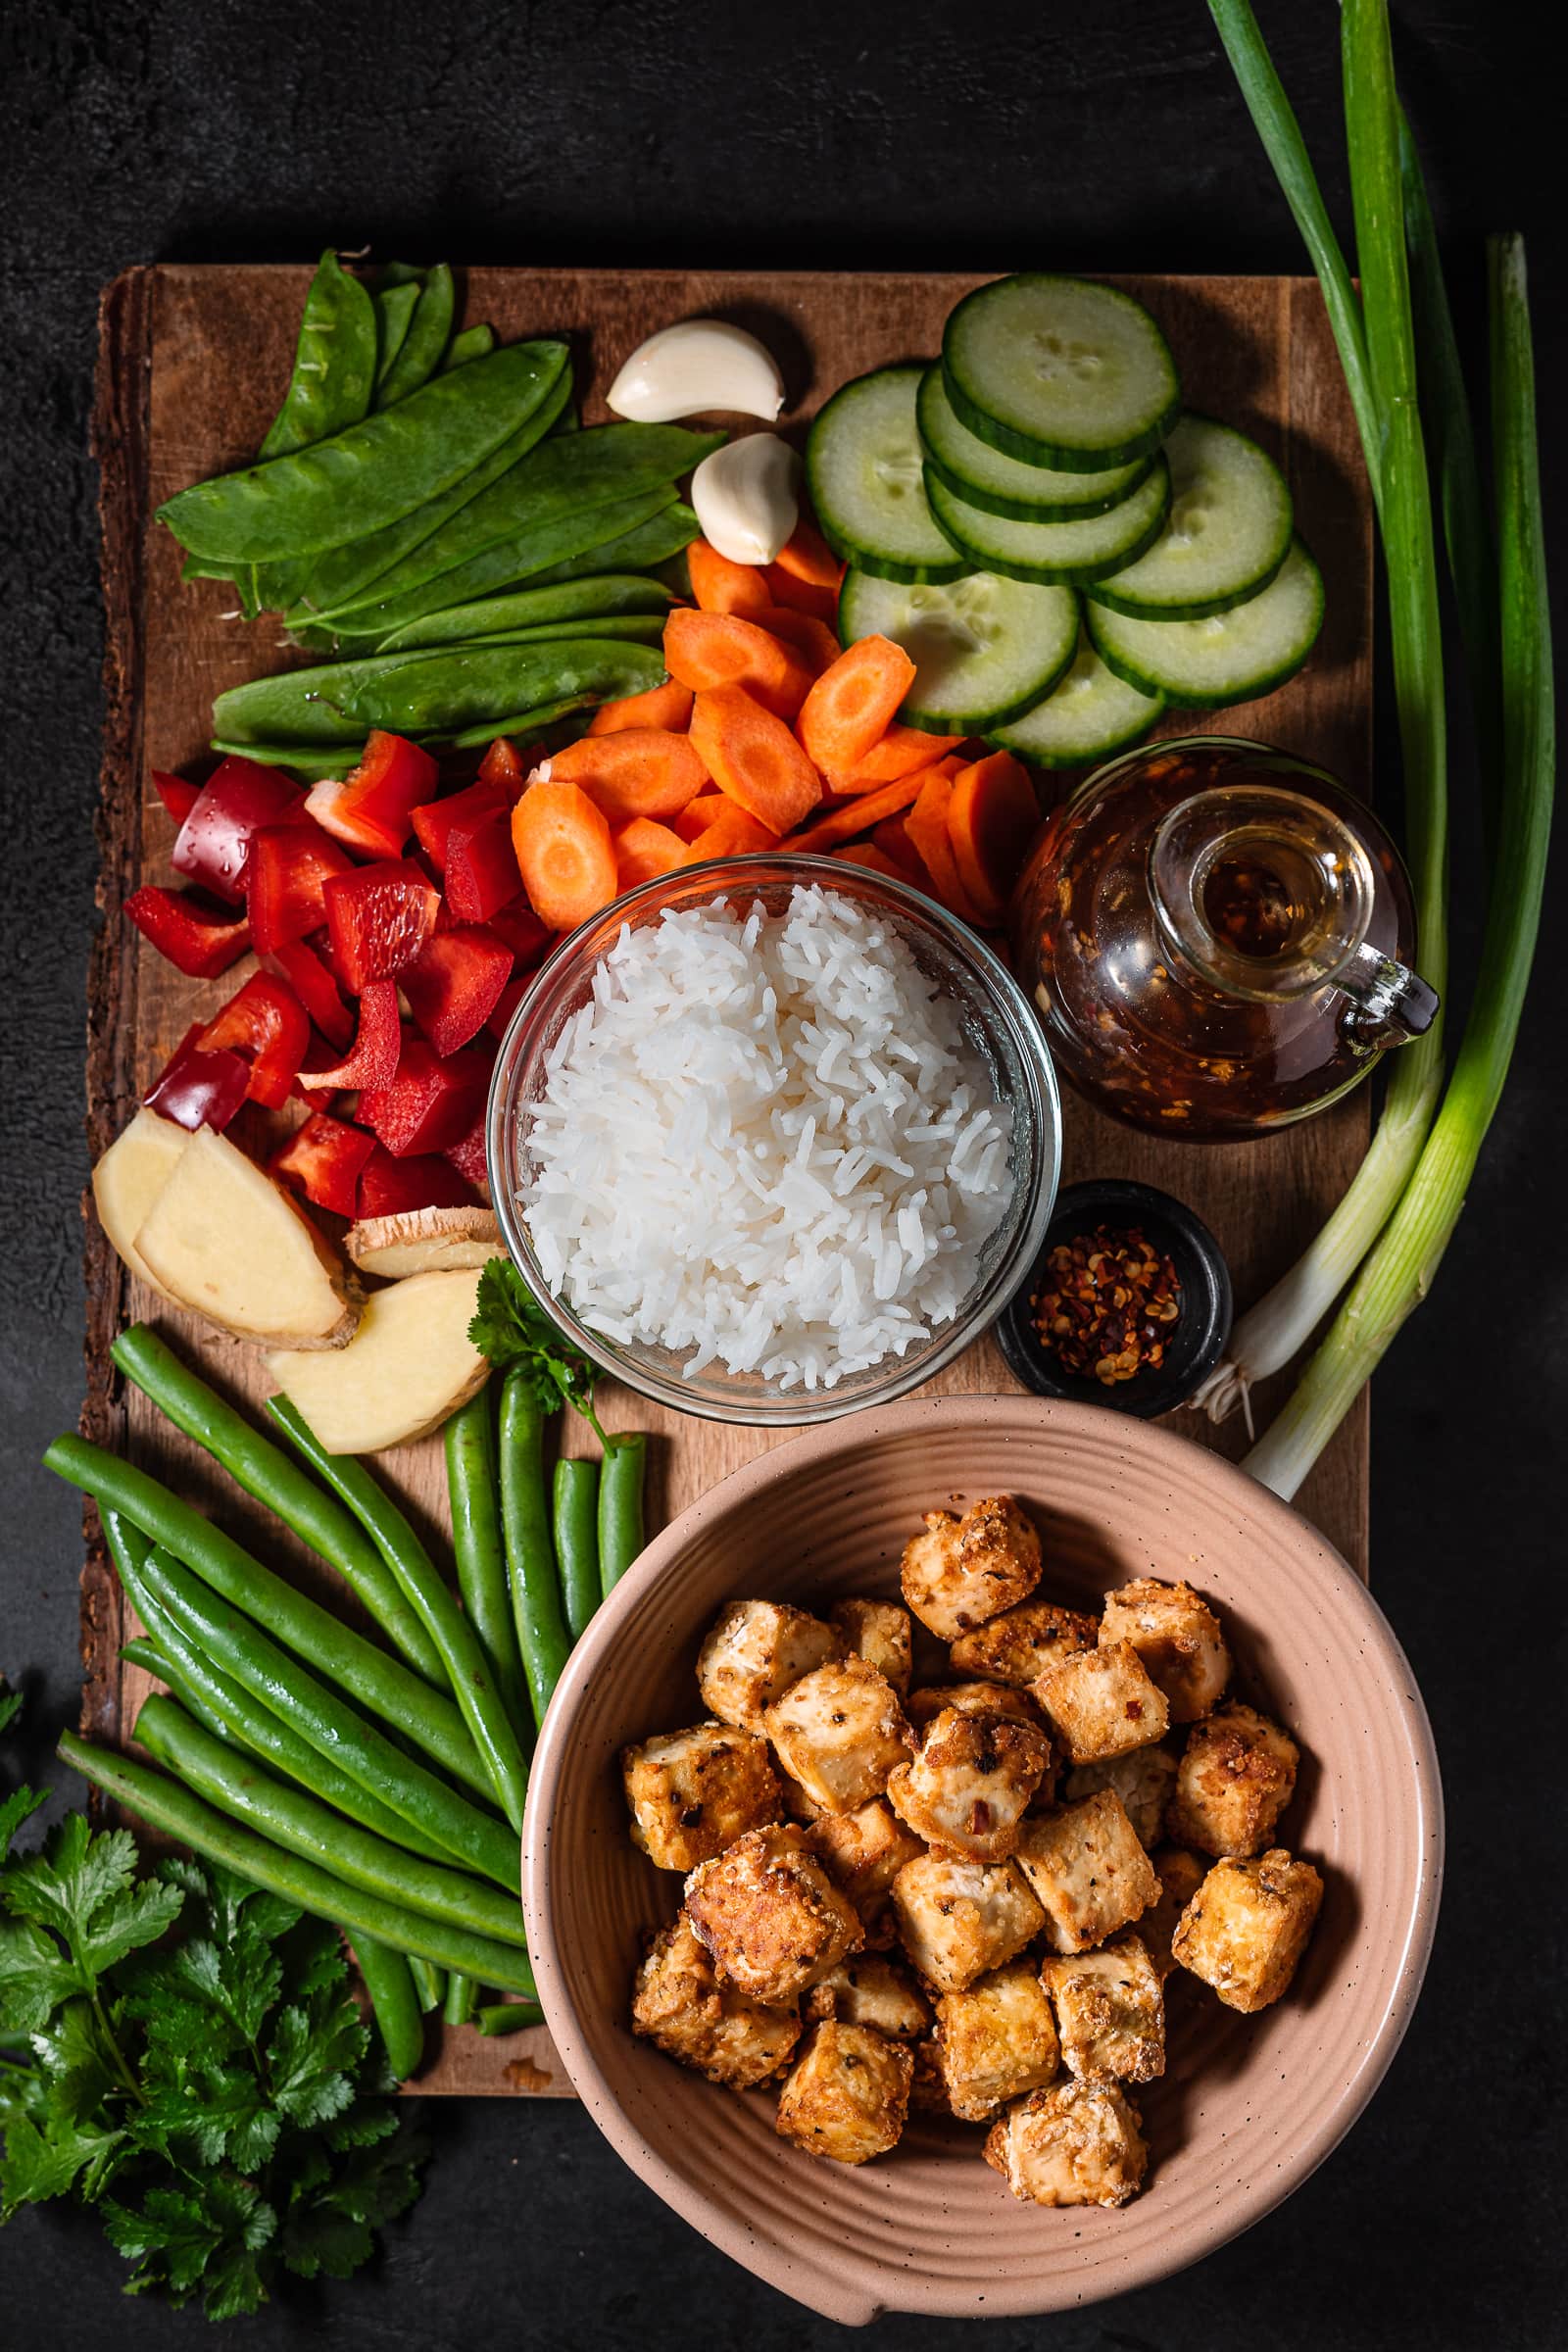 Vegetables and tofu on a wooden cutting board.